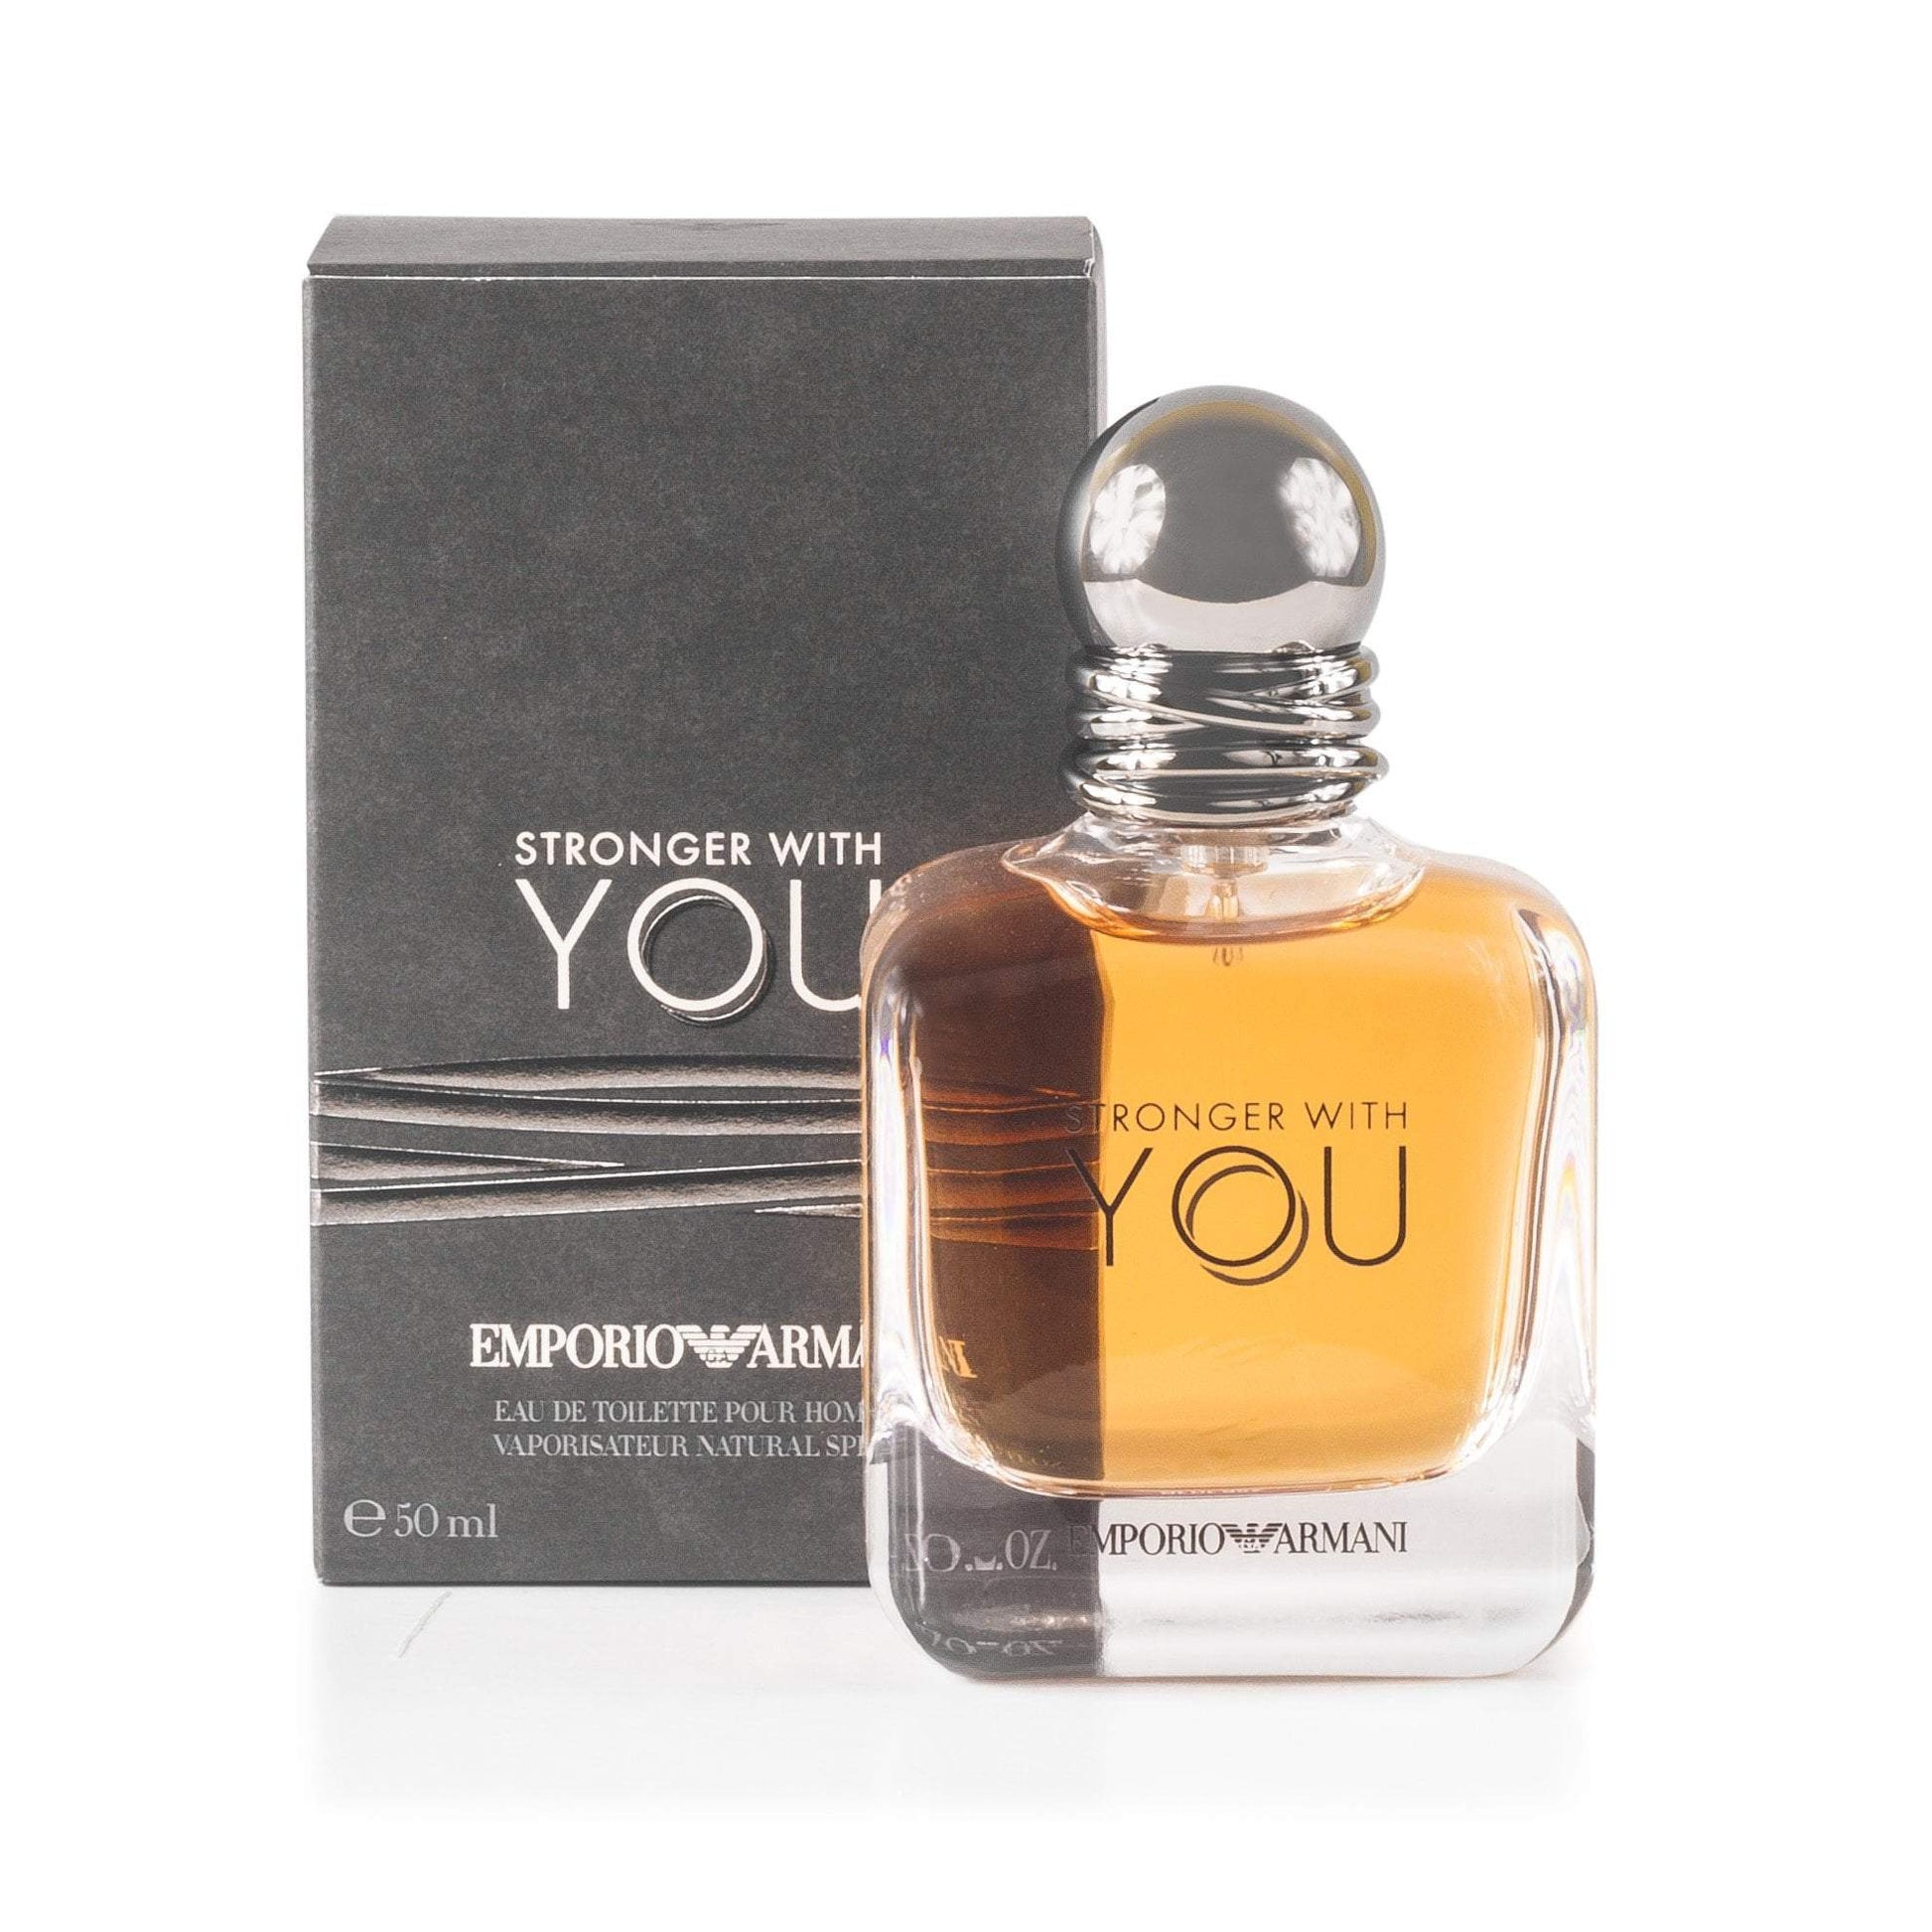 Stronger With You Eau de Toilette Spray for Men by Giorgio Armani, Product image 1